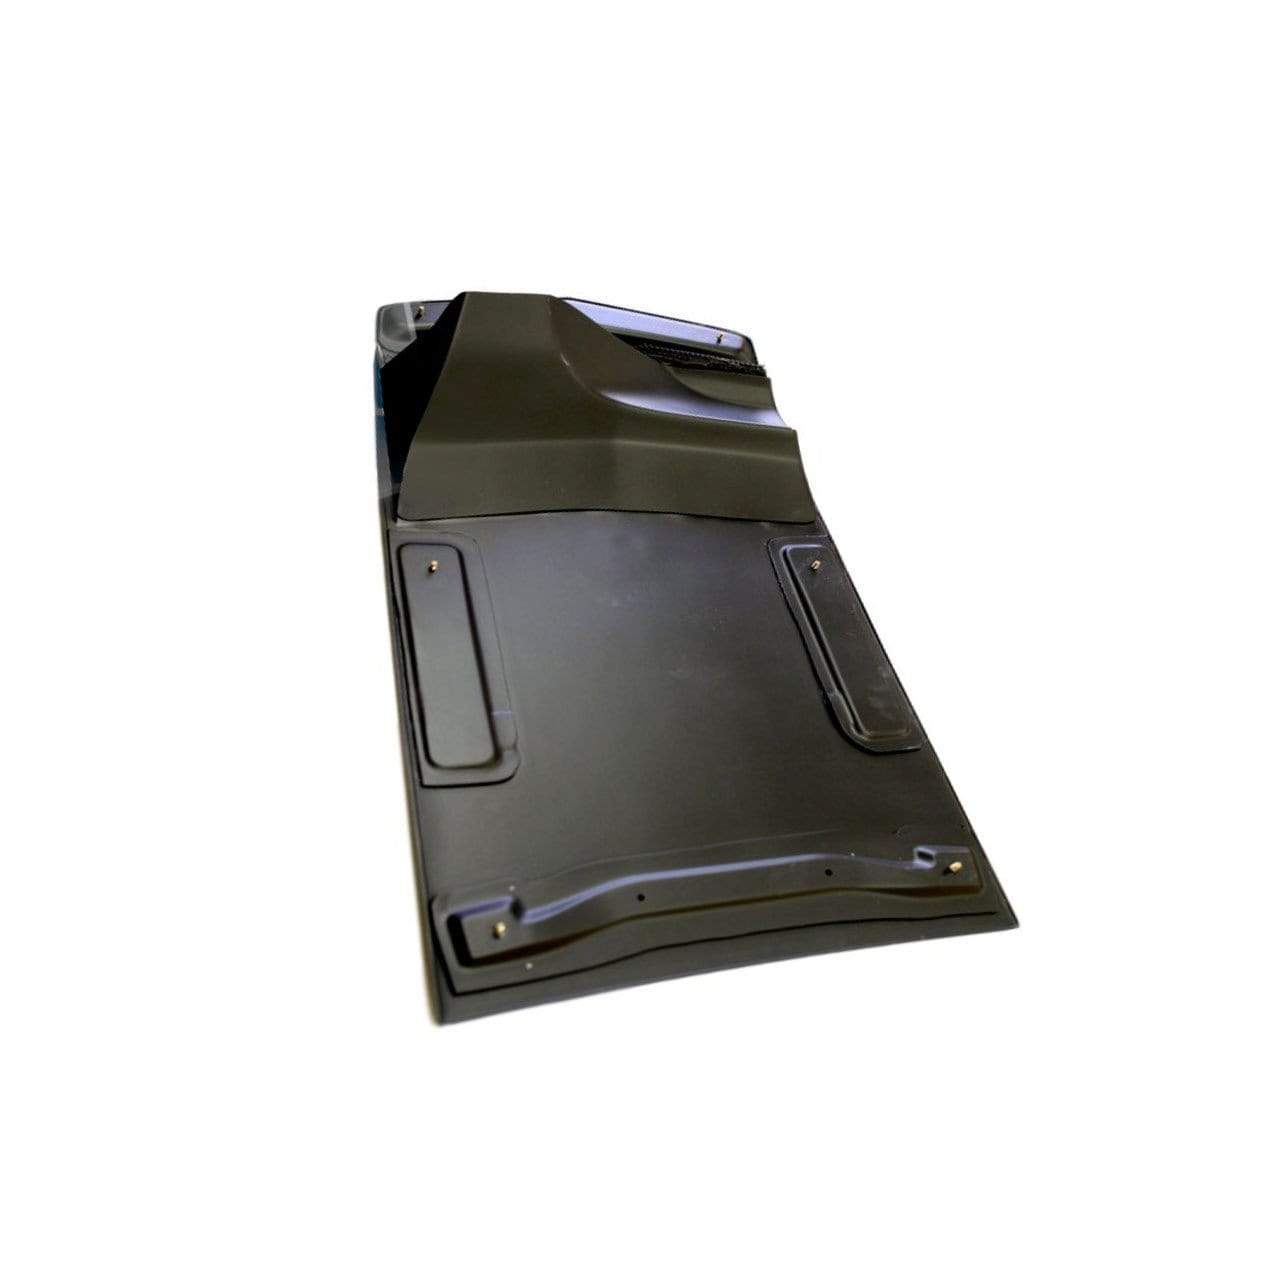 ACS Composite ZL1 Water Deflector Panel Tray 33-4-094 for Genuine GM ZL1 or Replica Hood Inserts - SKU 33-4-094 PRM.